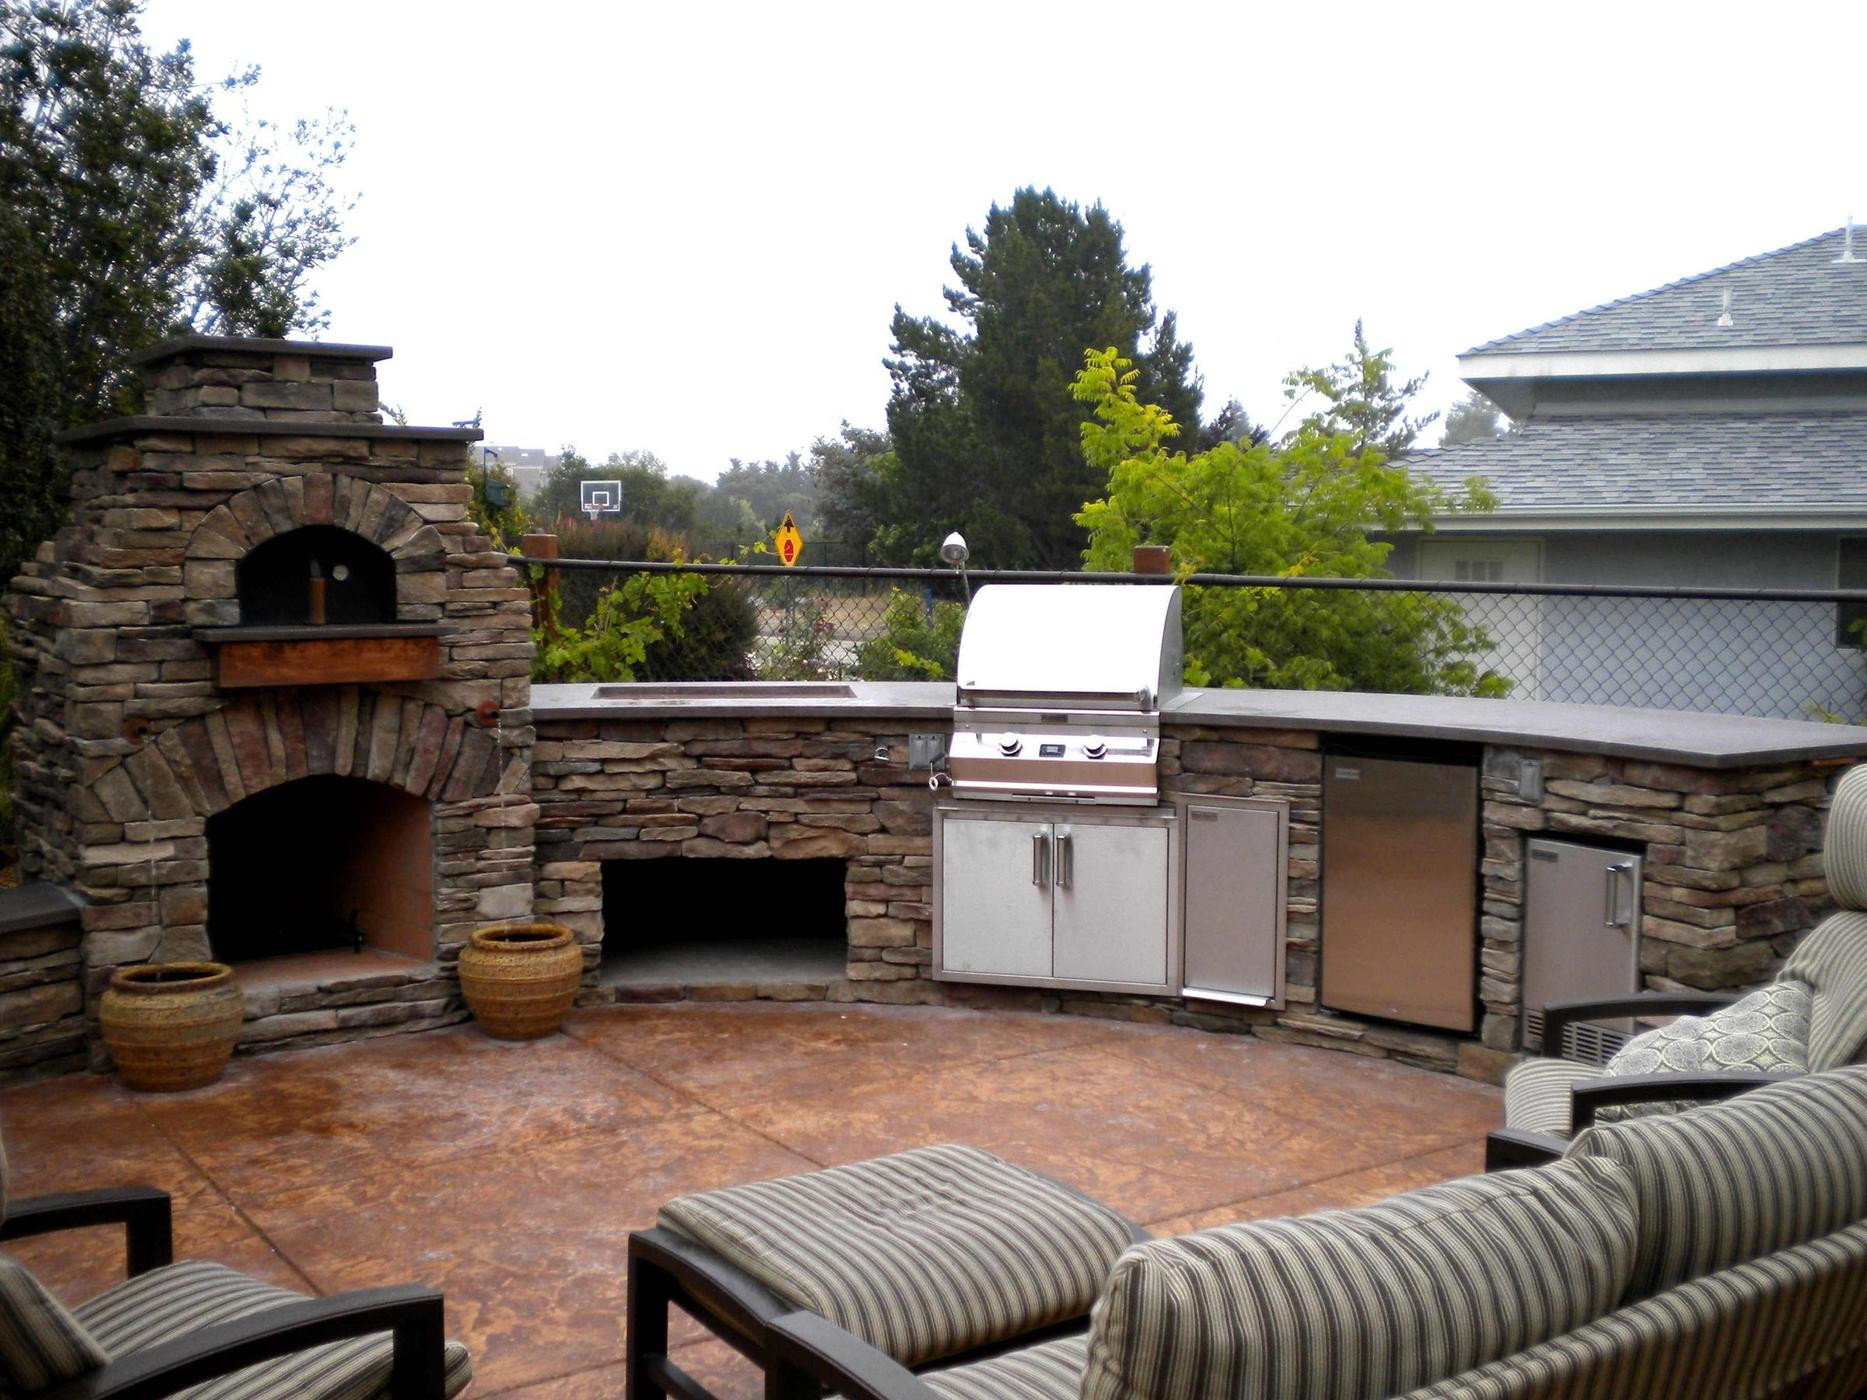 Outdoor Kitchen Oven
 Help customers pondering outdoor kitchens stand out